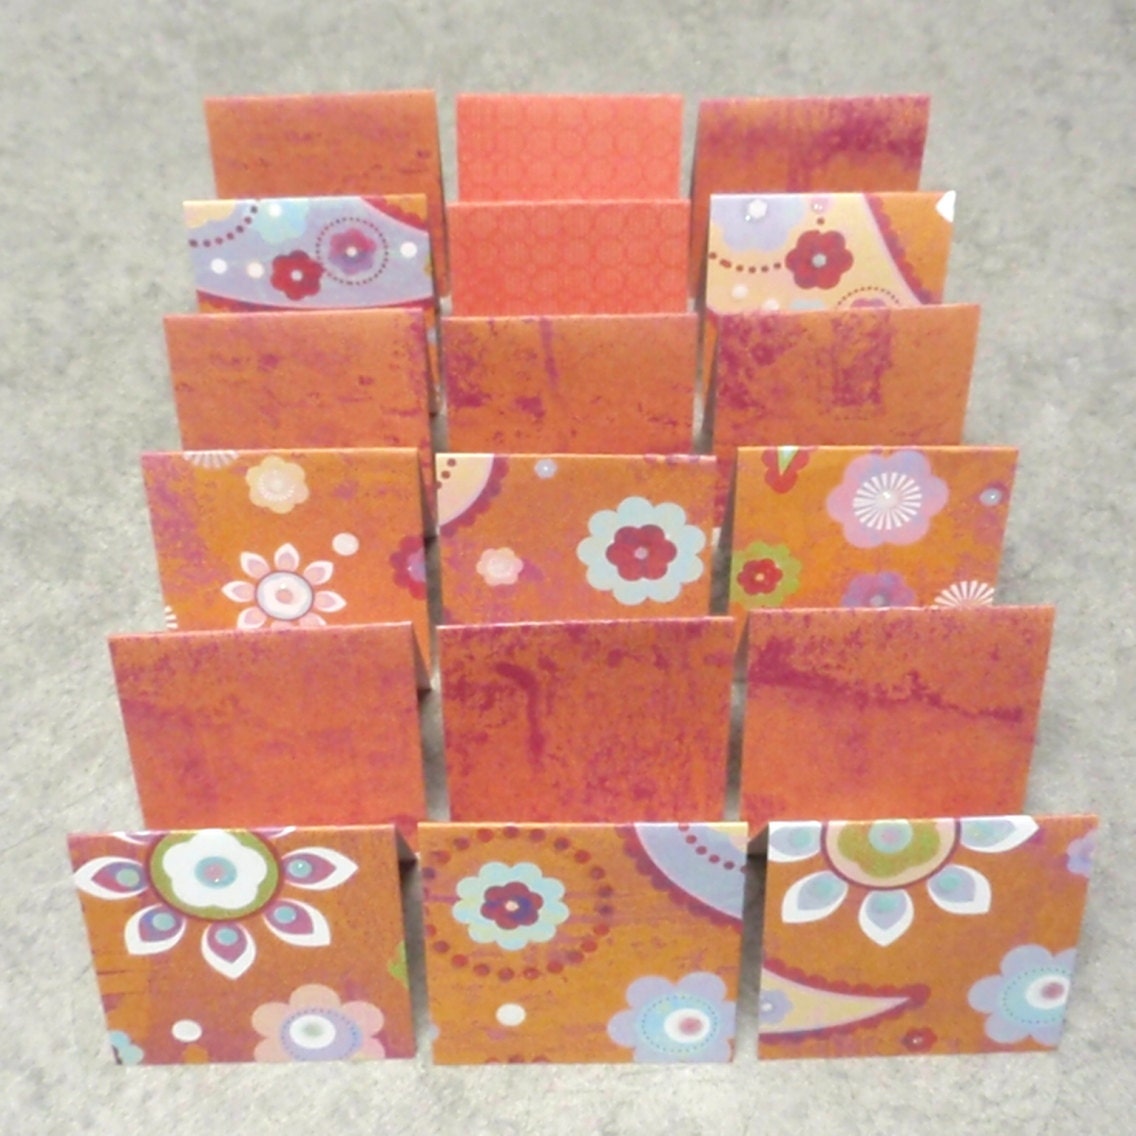 18 Mini Cards - blank for thank you notes - orange purple floral - ksewingbasket